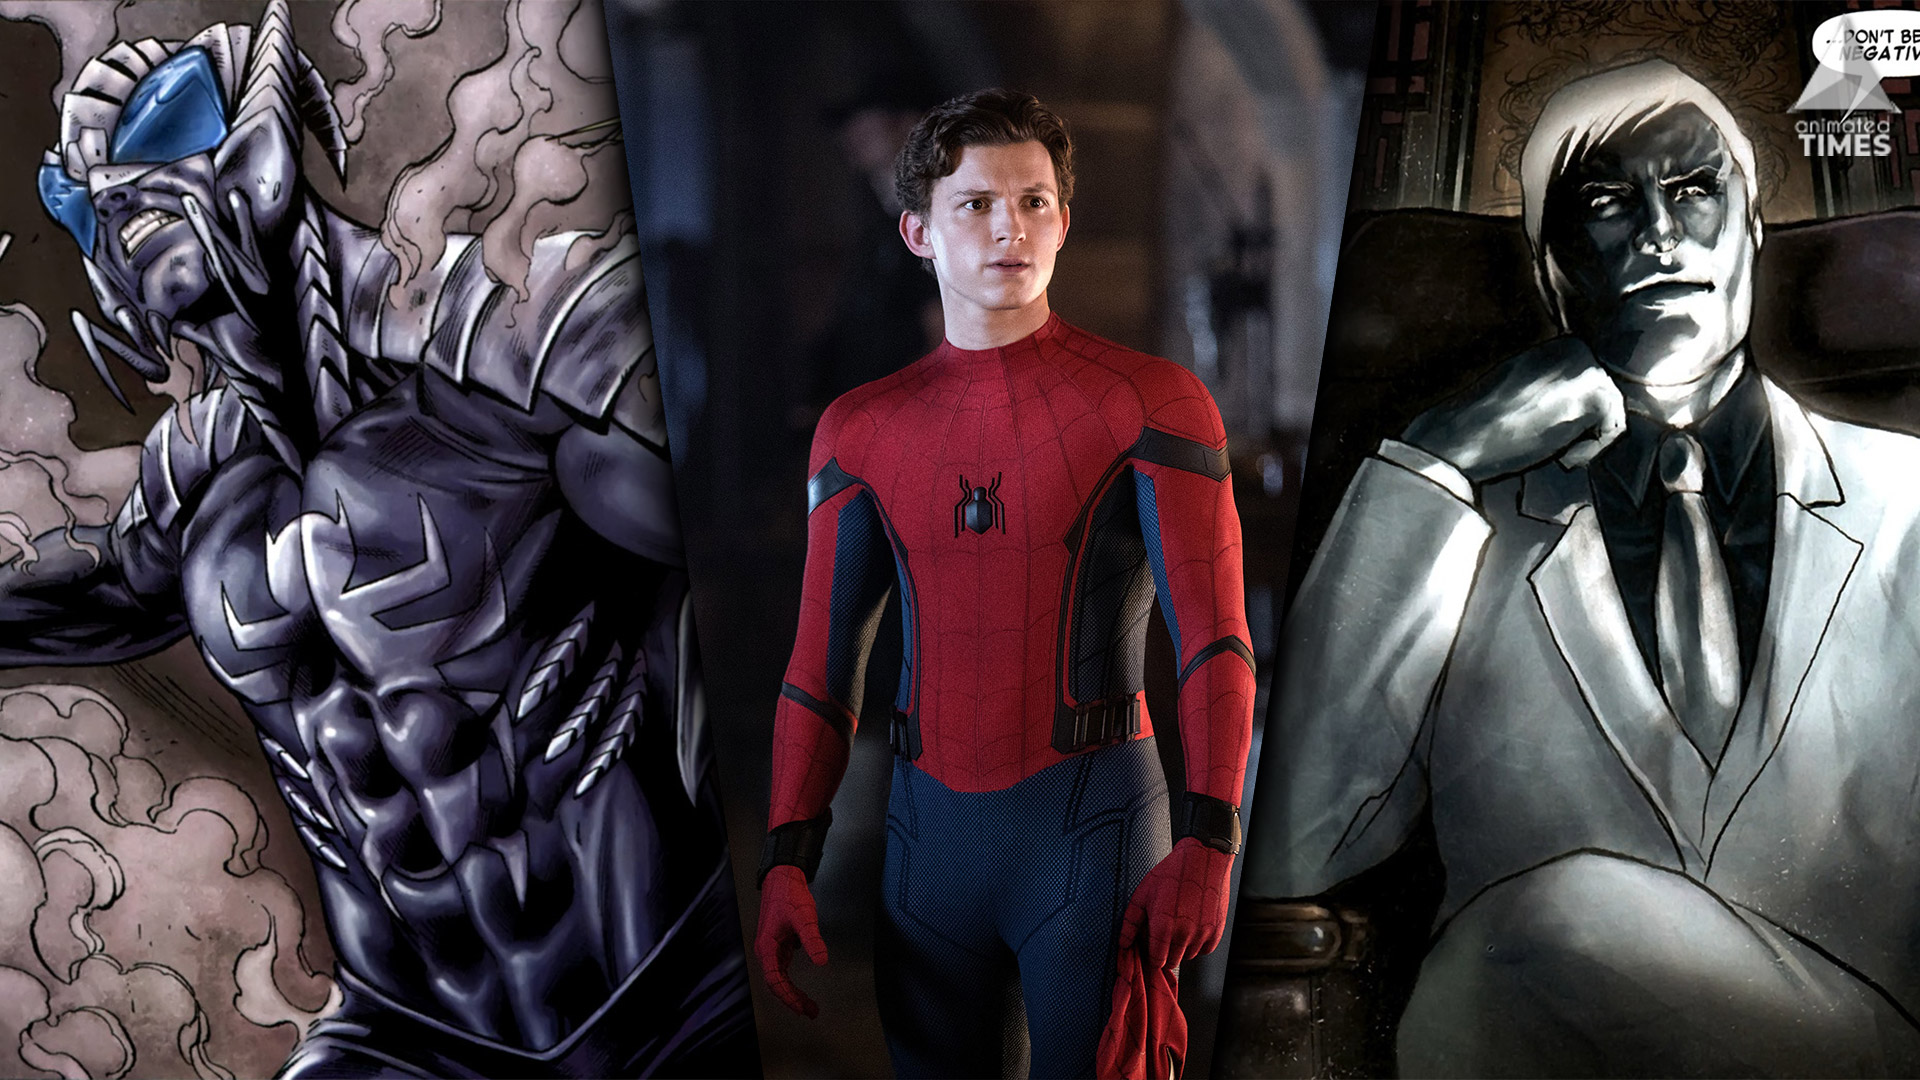 MCU’s Spider-Verse: 10 Underrated Spider-Man Villains That Could Be In The Live-Action Movie